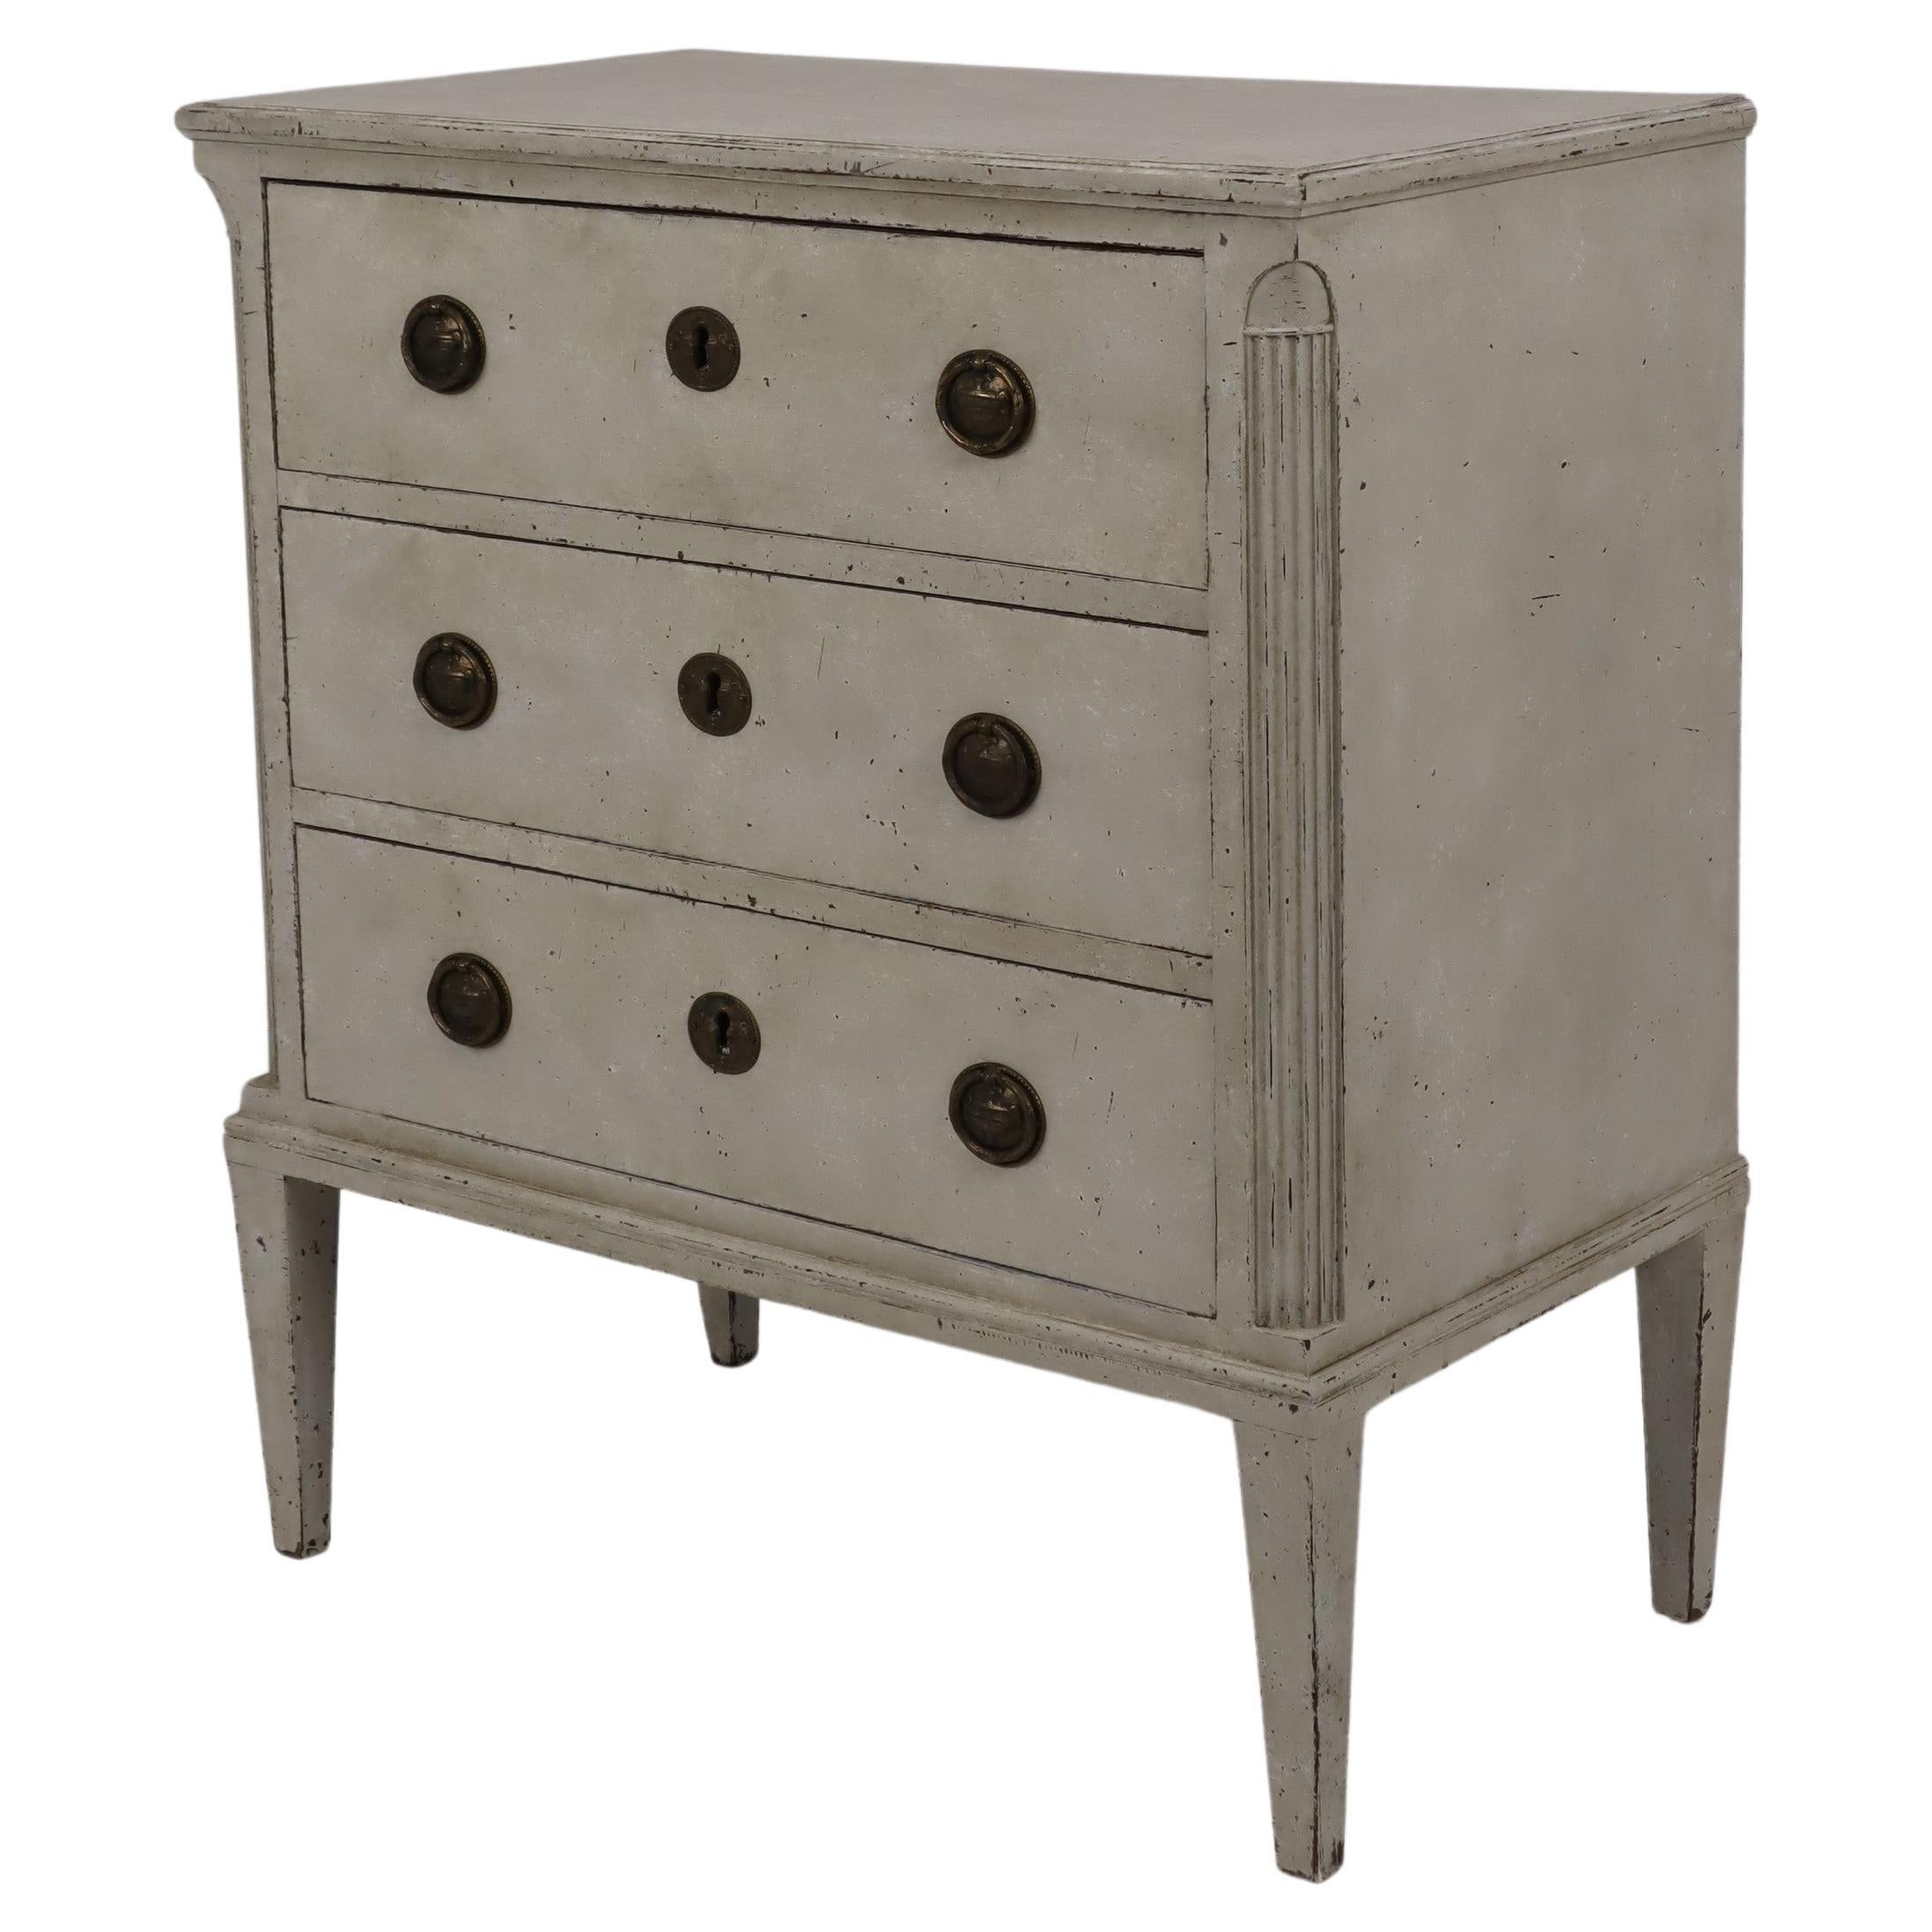 Swedish 1820s Gustavian Style Gray Painted Chest with Carved Semi-Columns